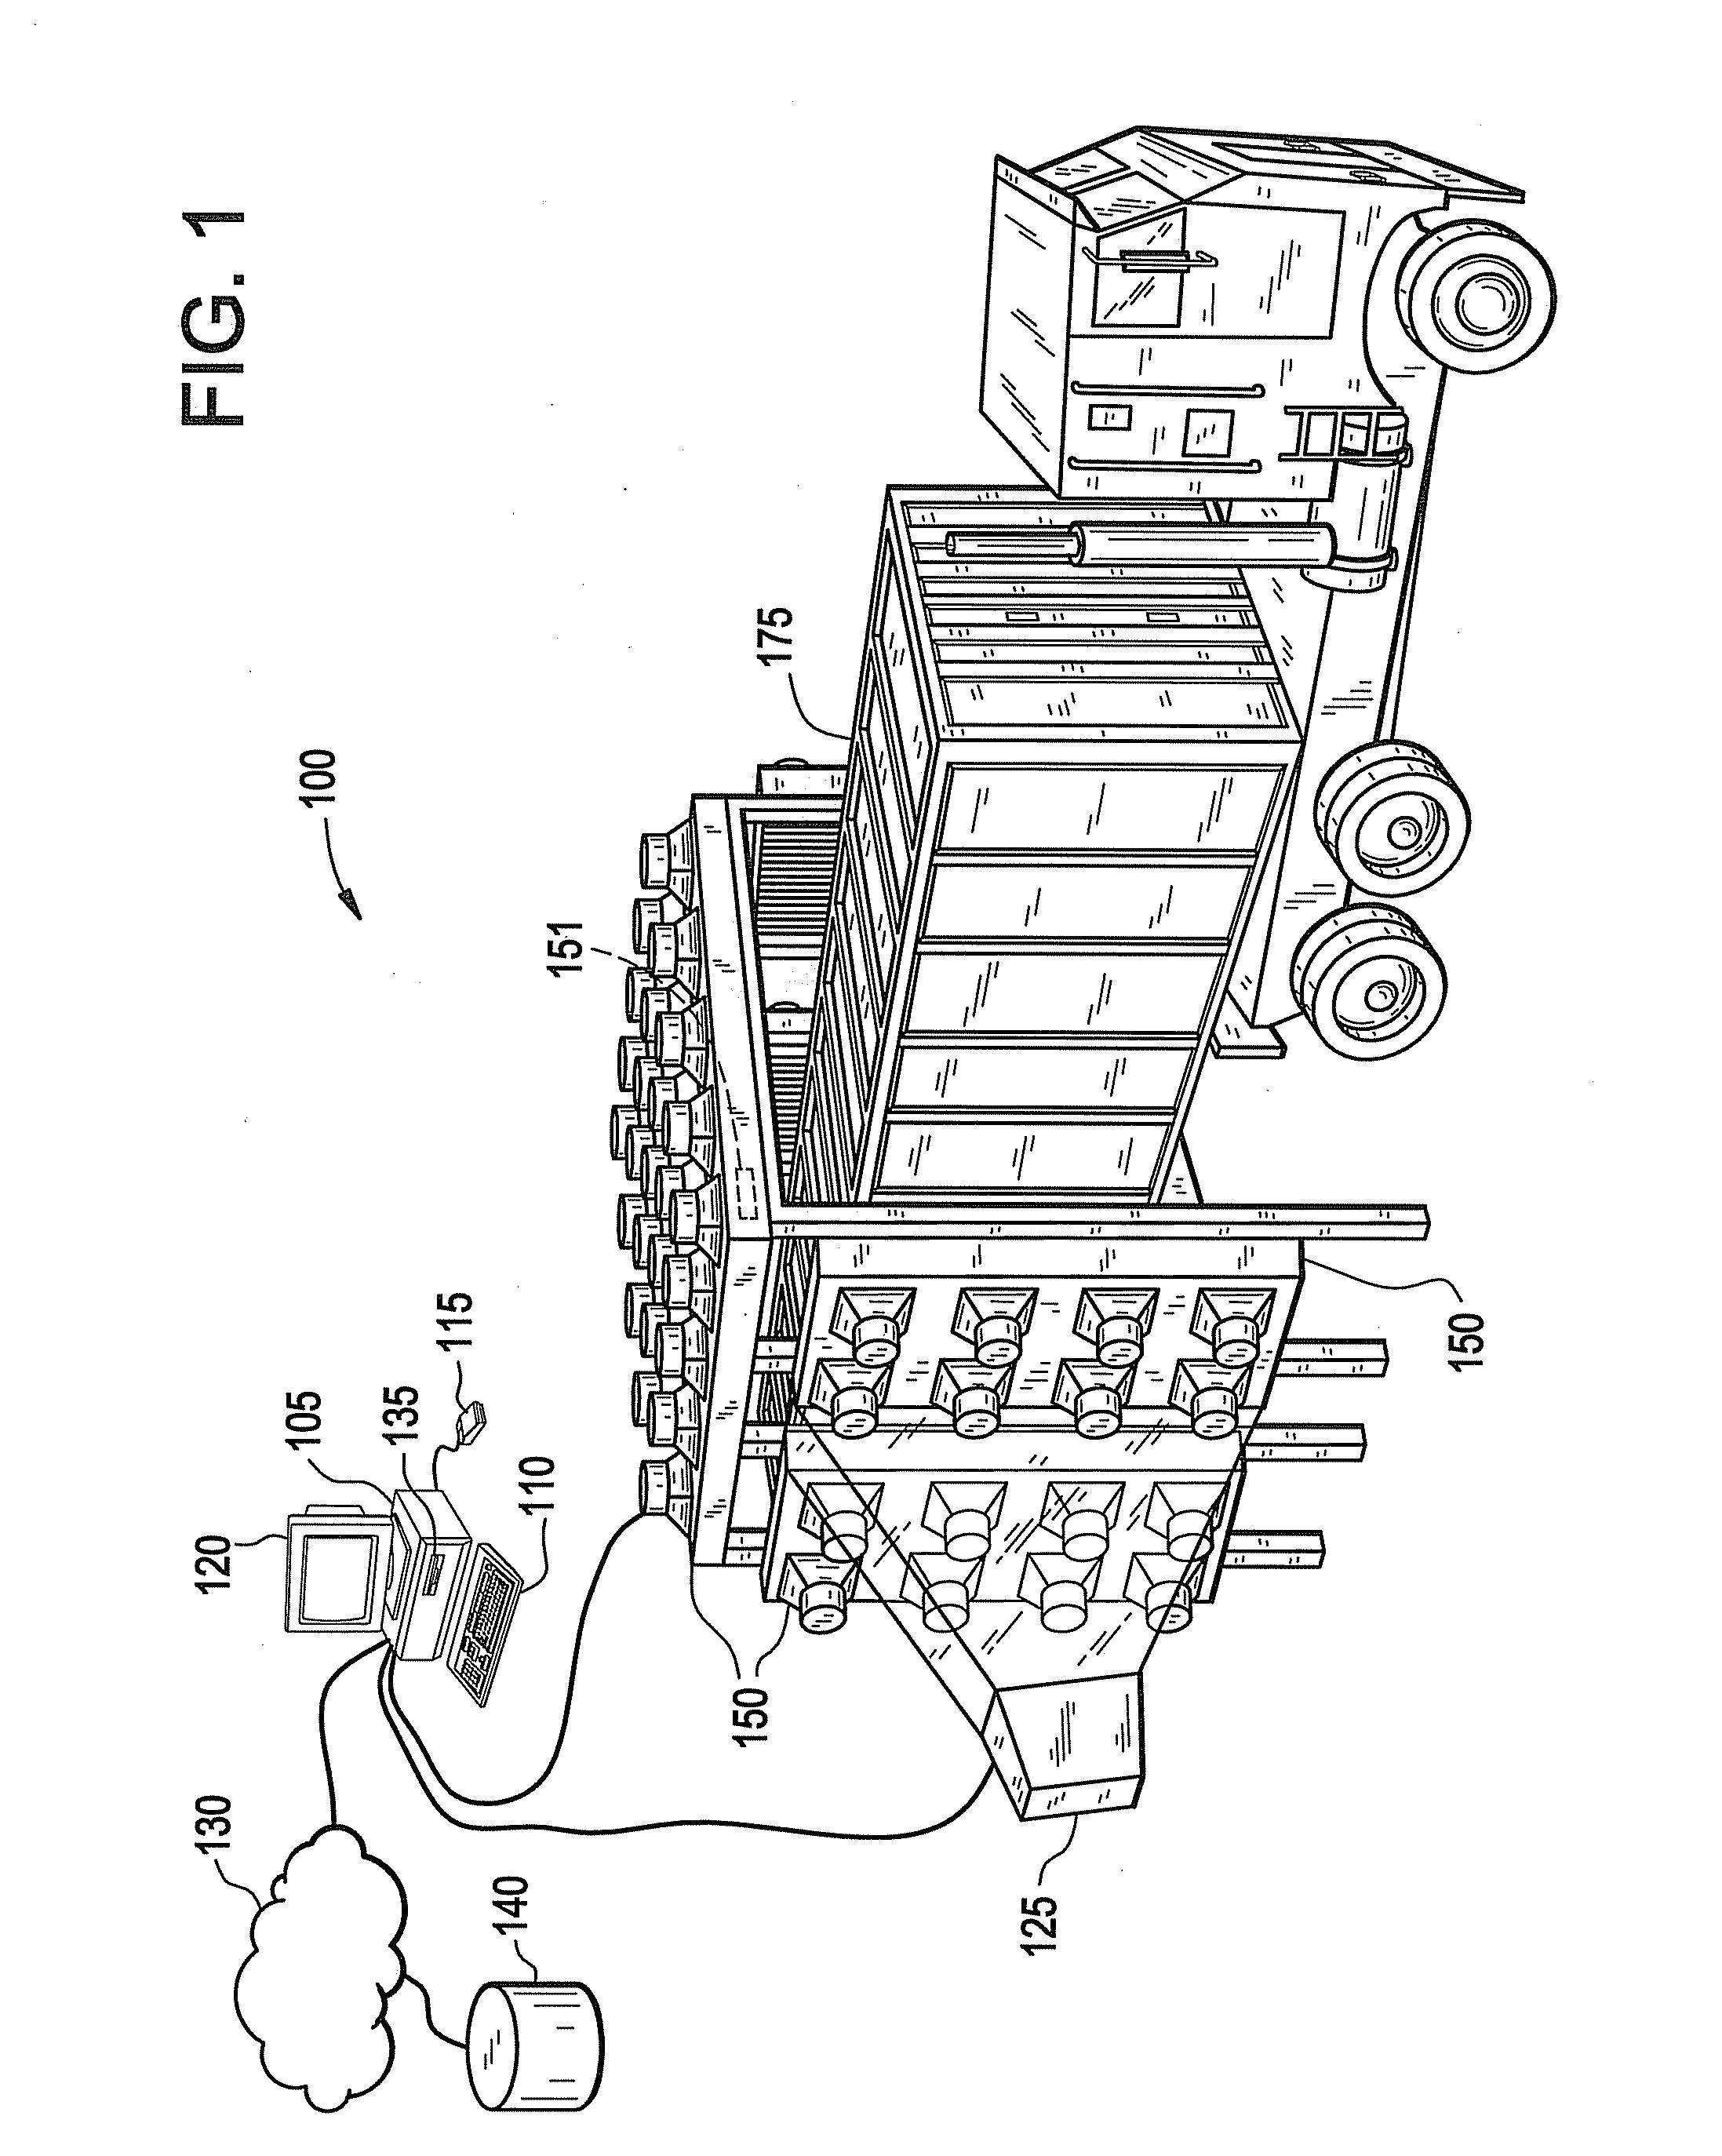 Method and system for special nuclear material detection